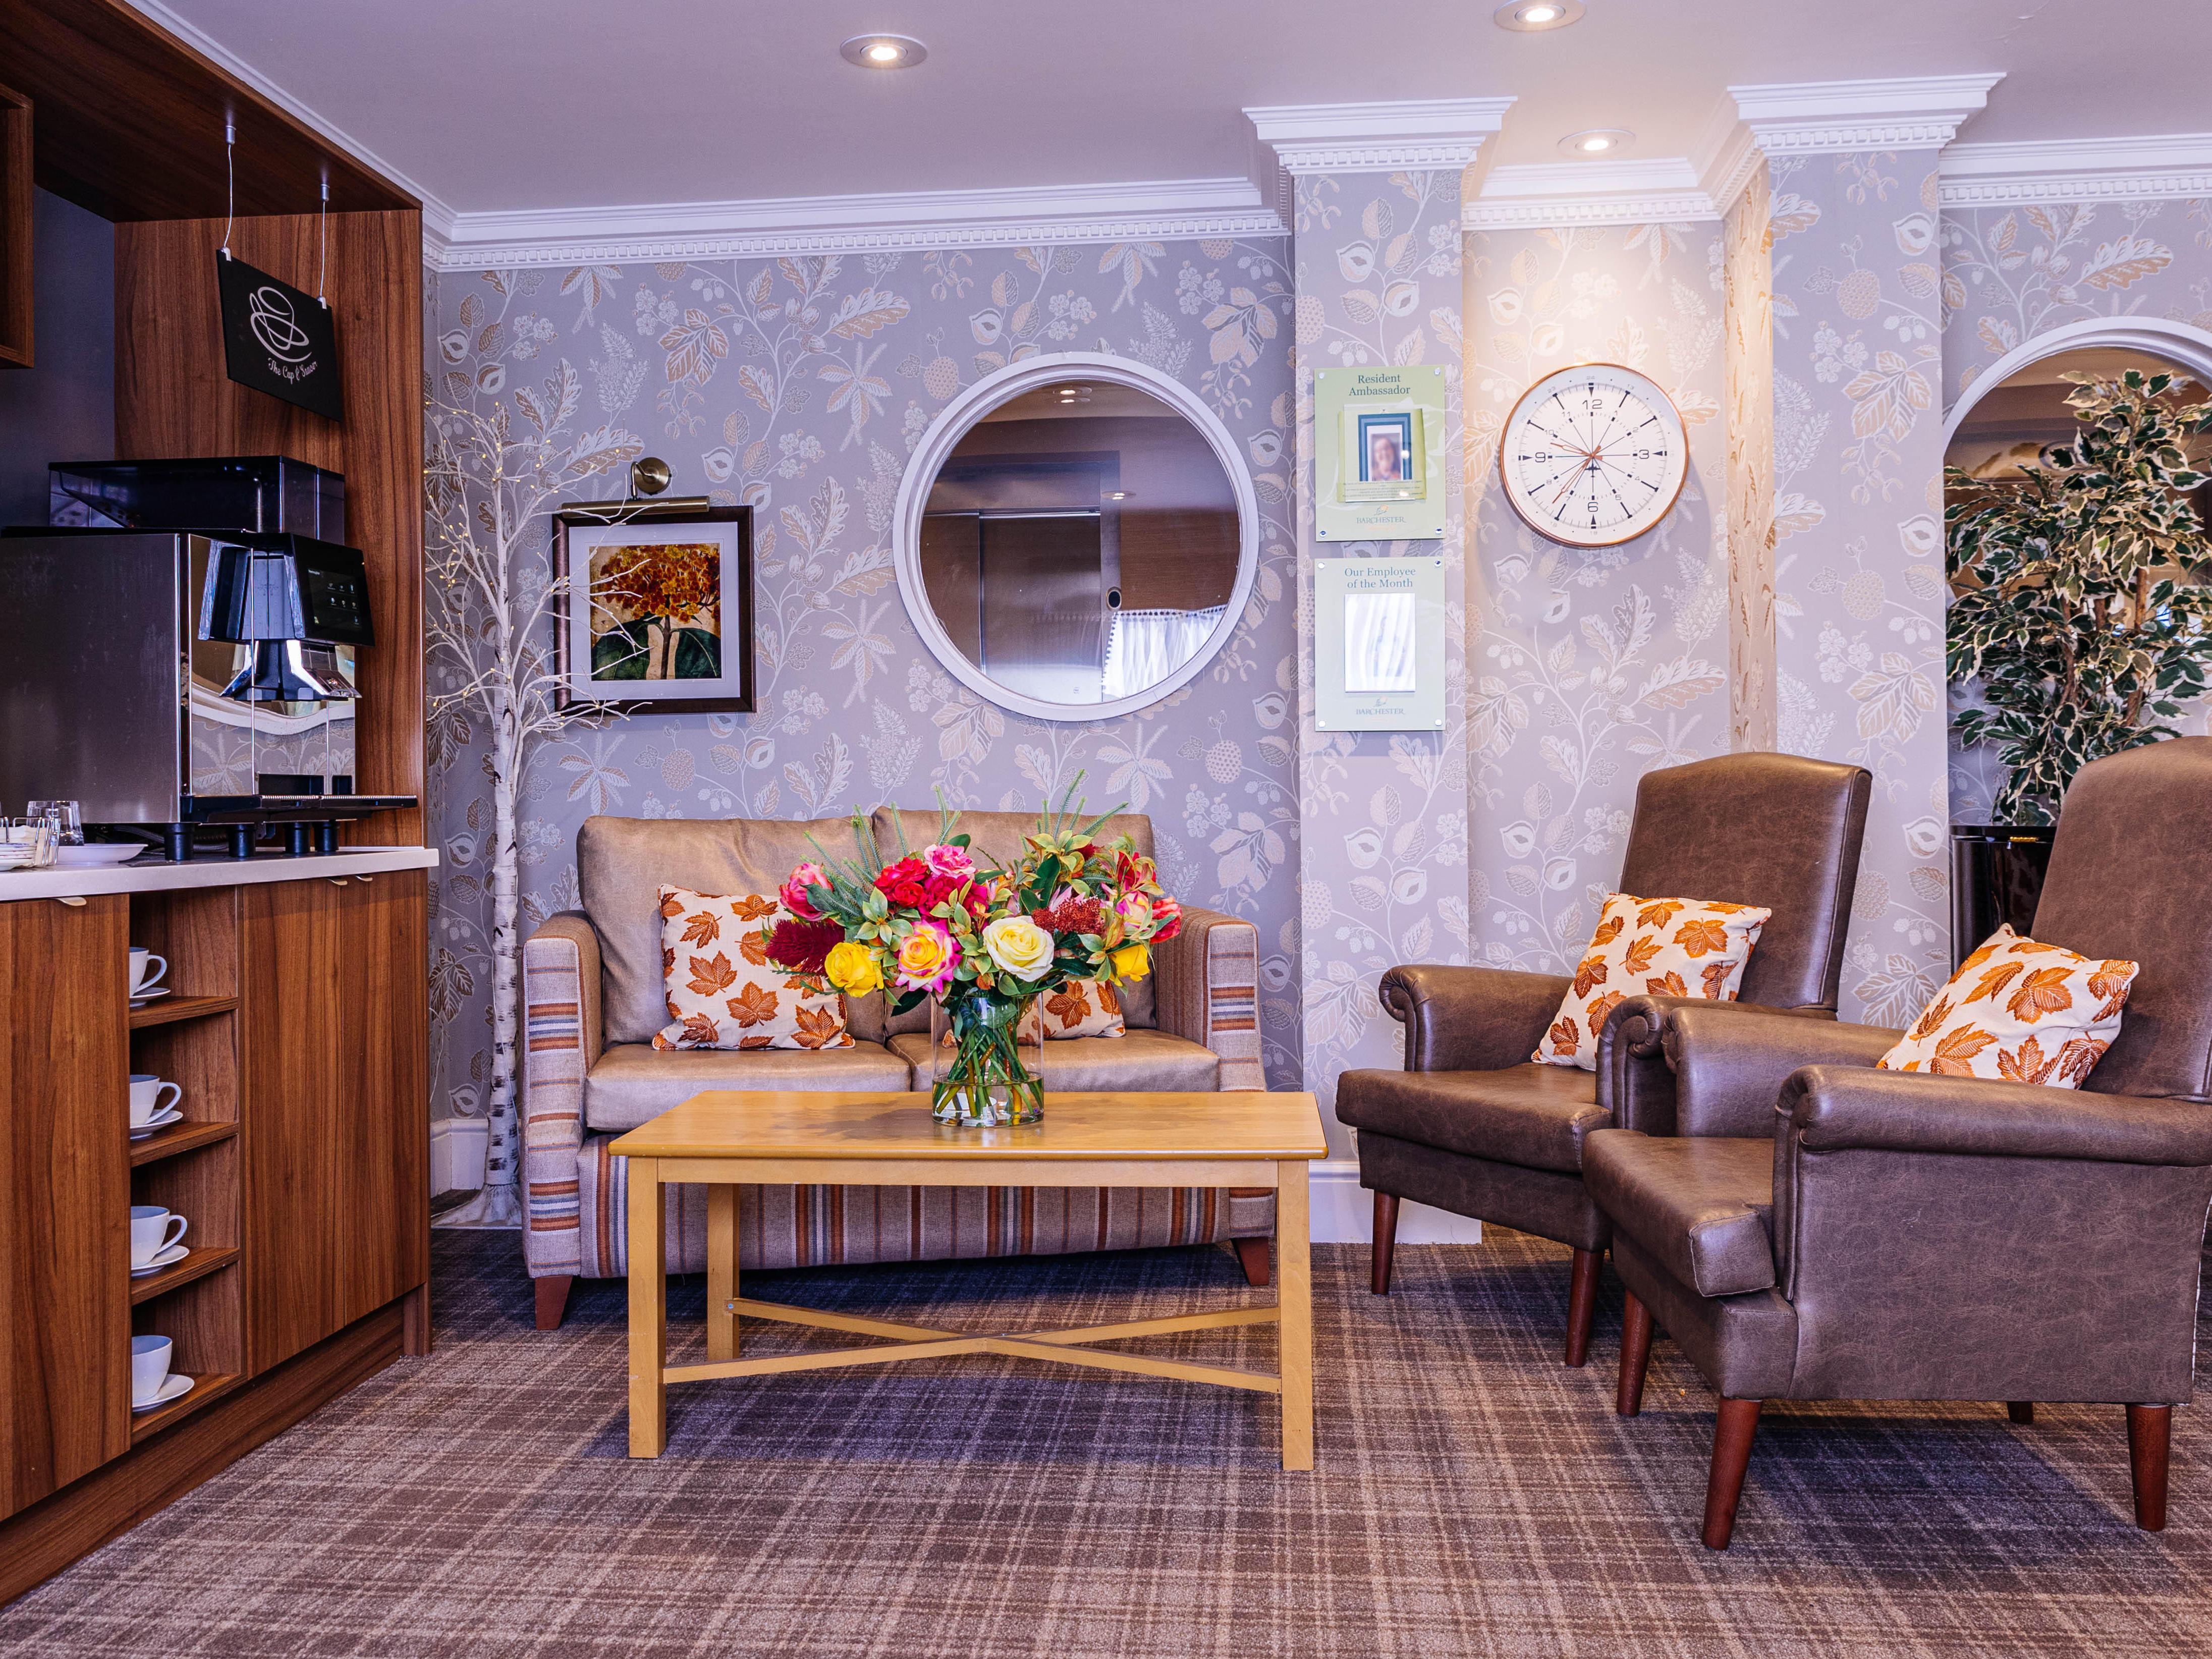 Images Barchester - Cepen Lodge Care Home